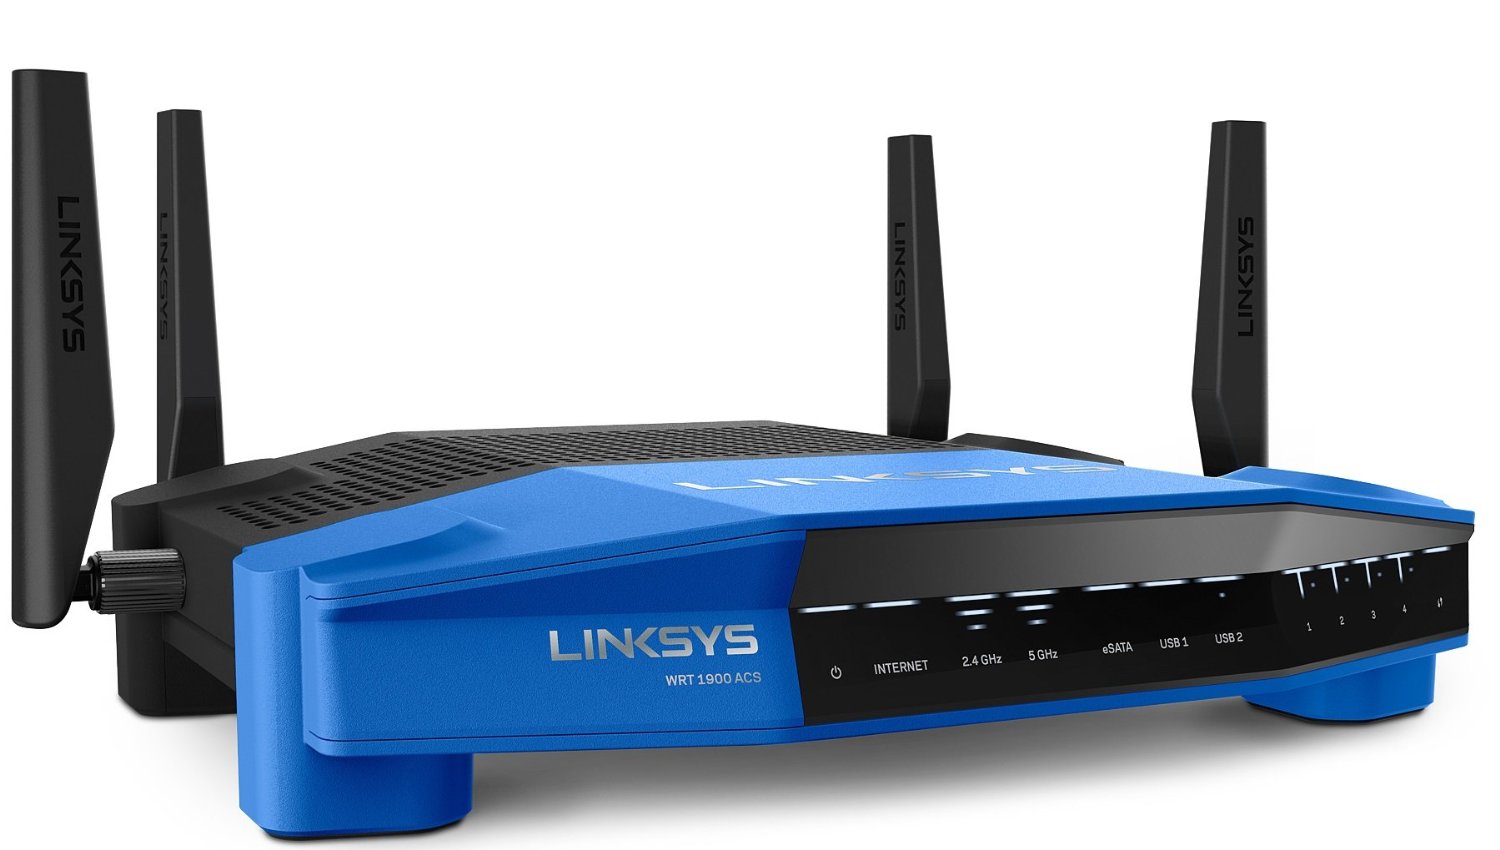 Linksys AC1900 Dual Band WiFi Wireless Router